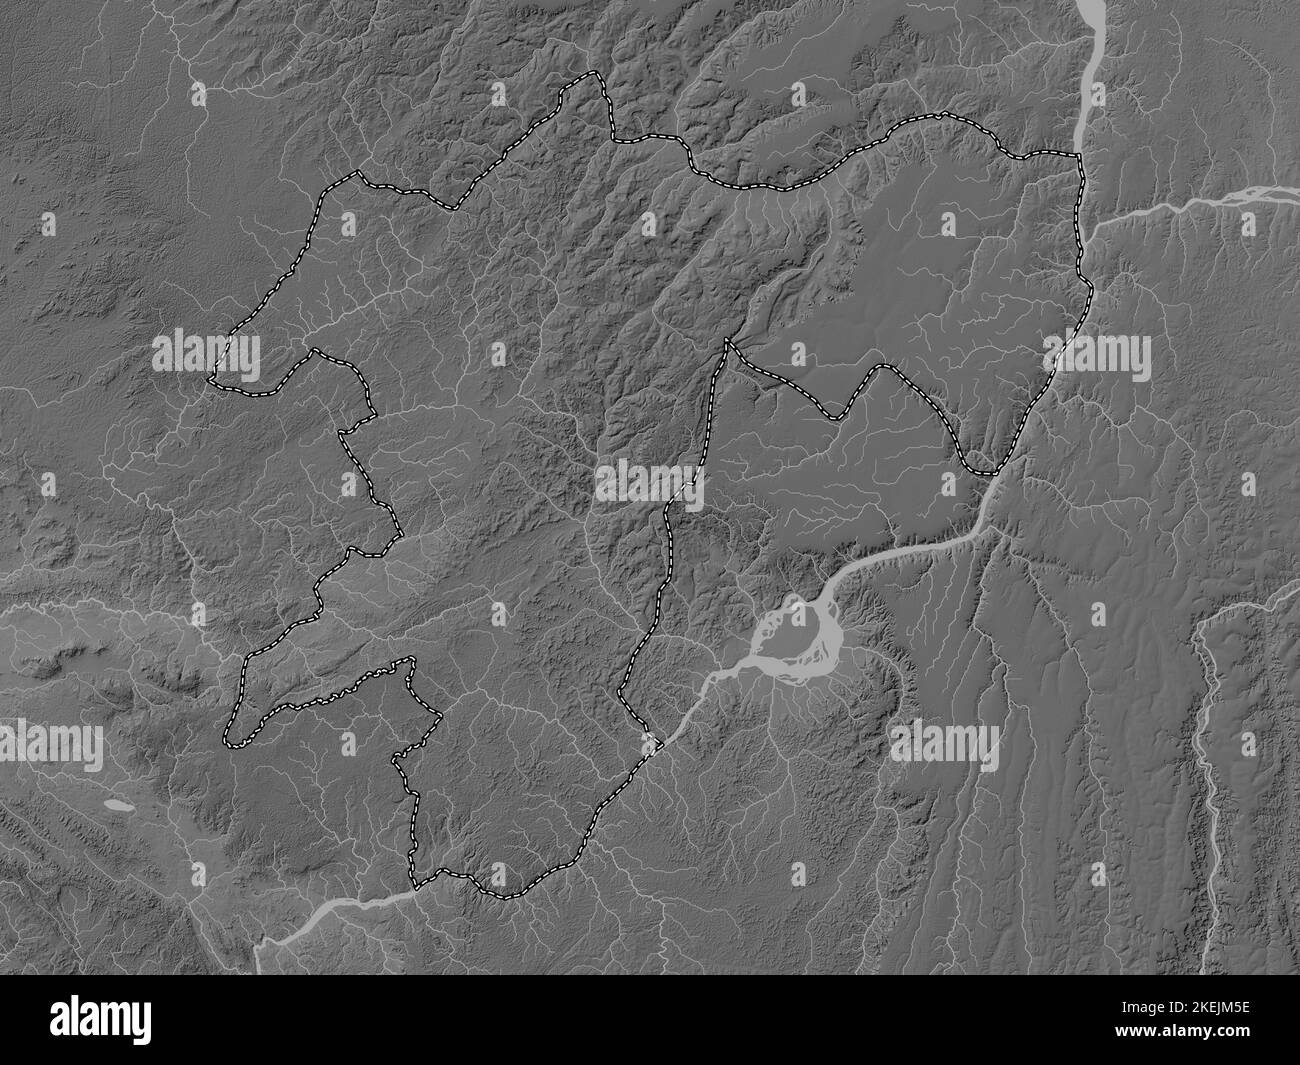 Pool, region of Republic of Congo. Grayscale elevation map with lakes and rivers Stock Photo